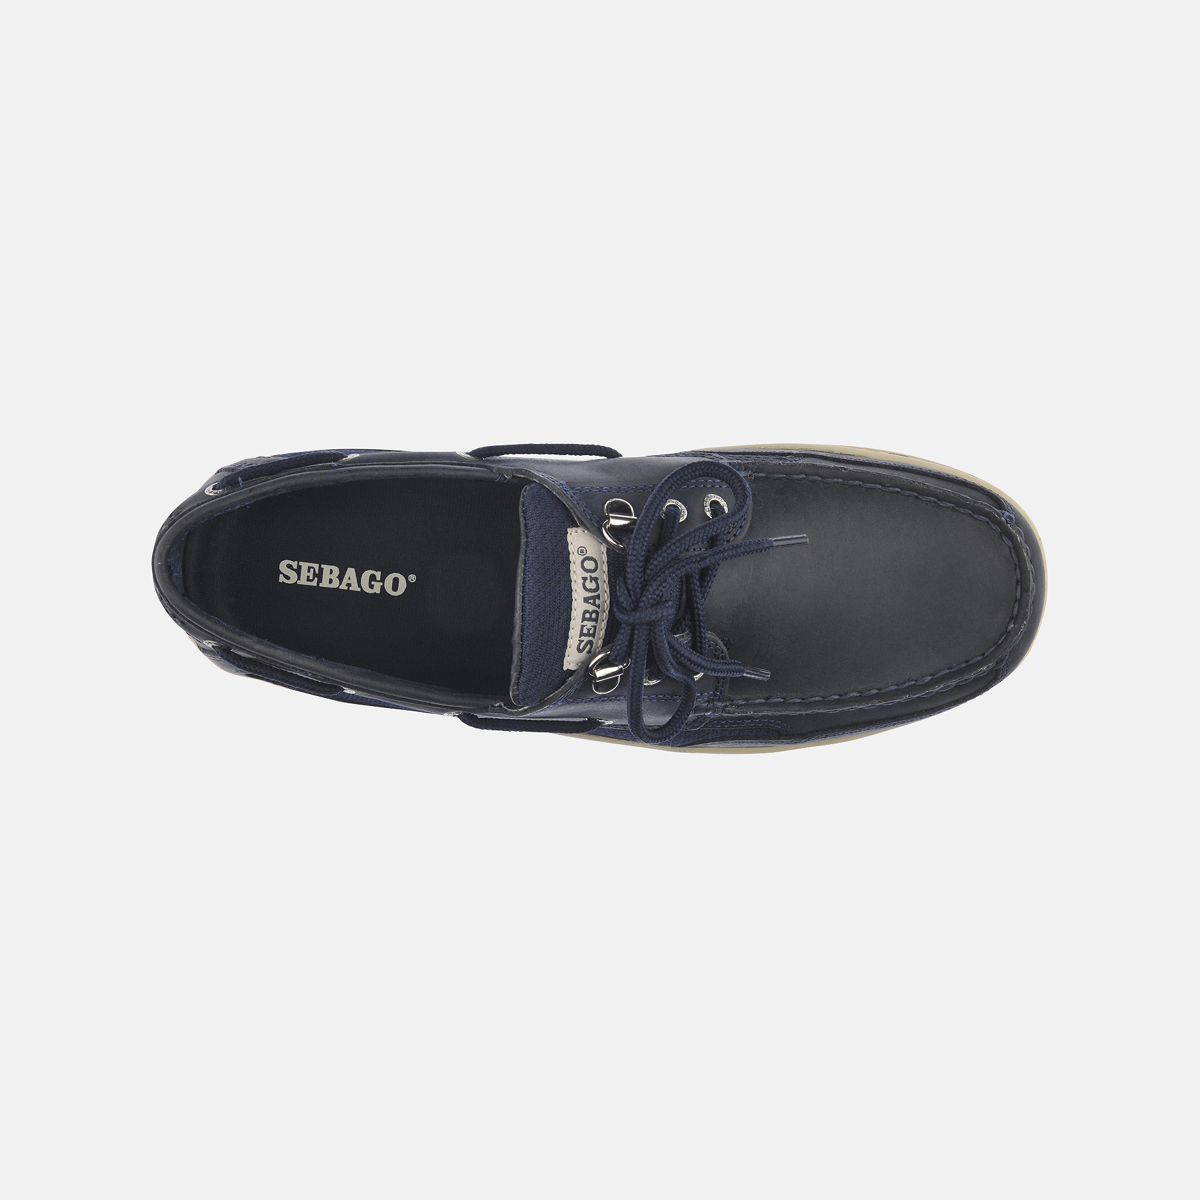 Sebago Clovehitch II chaussures bateau homme blue navy leather, taille 44,5 (US 10.5)